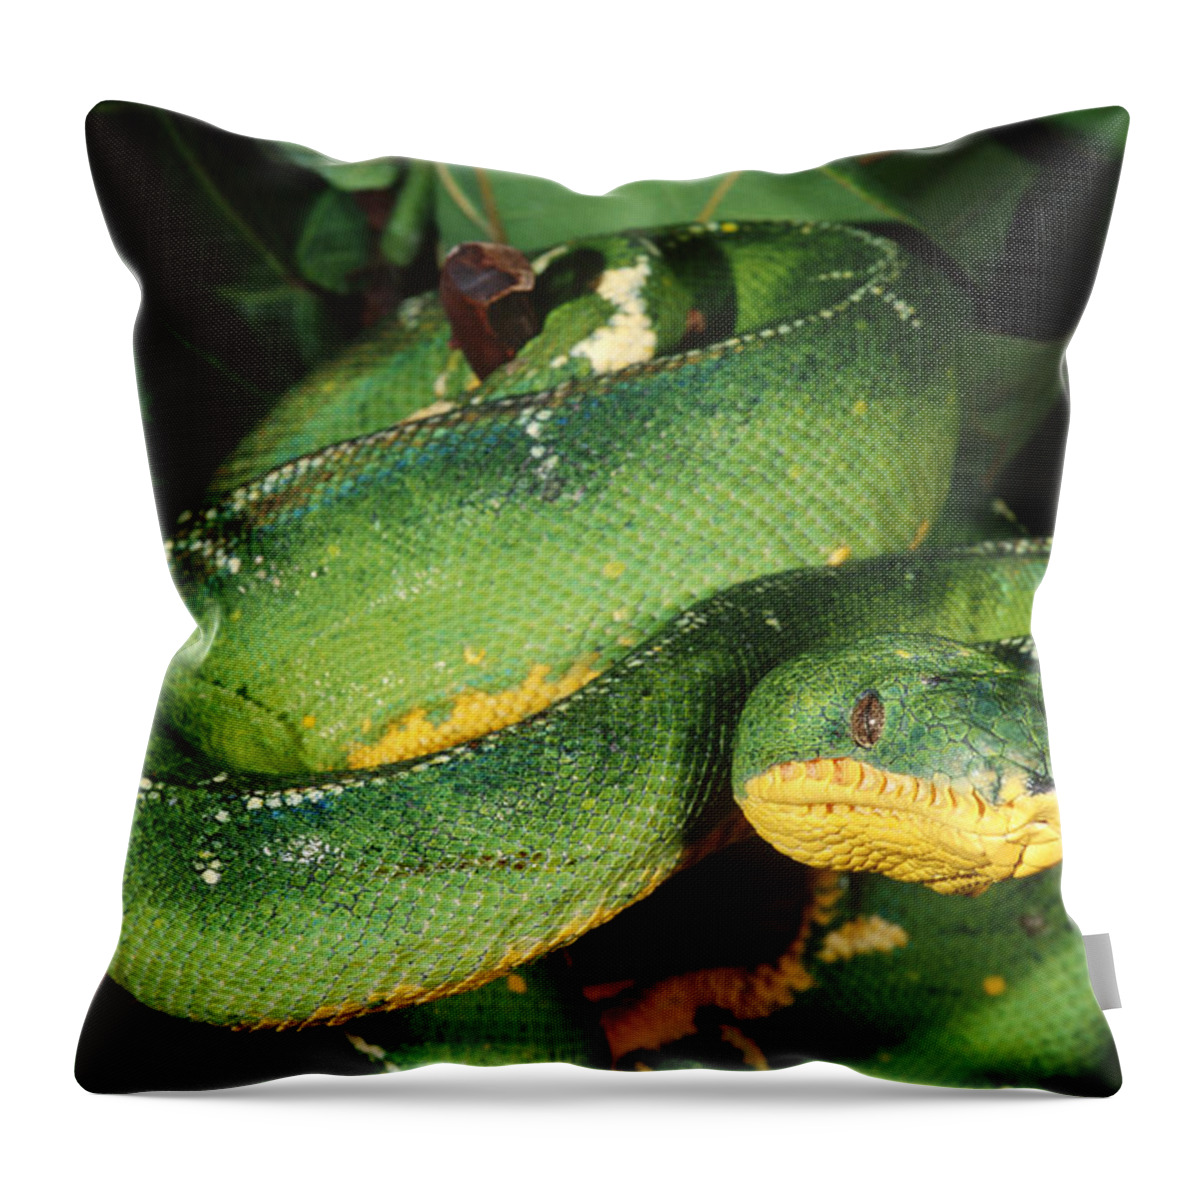 Animal Throw Pillow featuring the photograph Emerald Boa by Steve Cooper